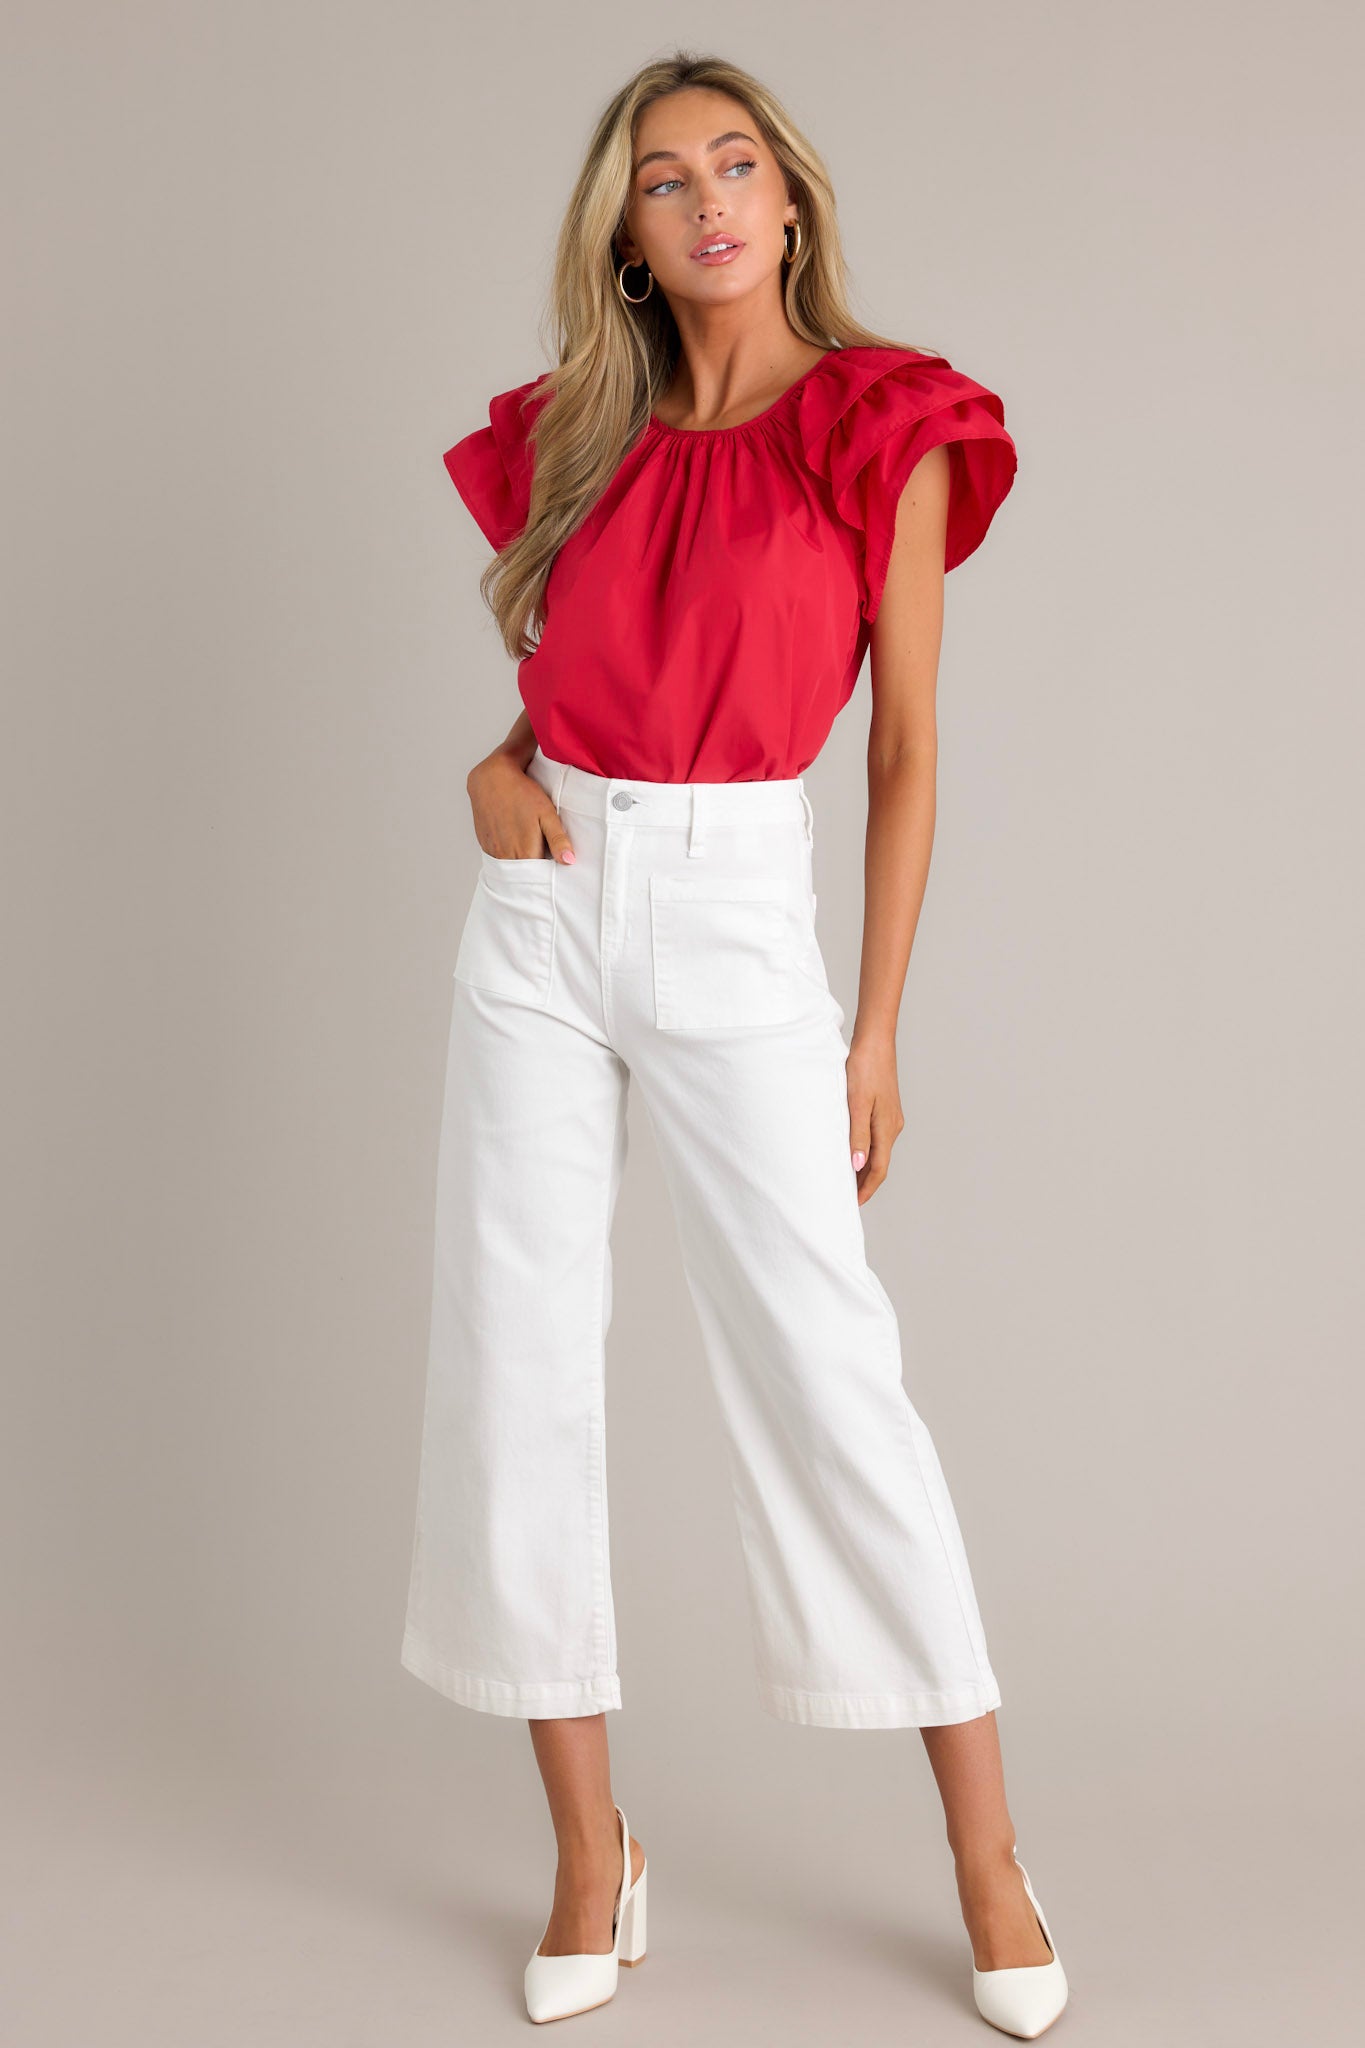 Front angled view of a red top featuring a rounded neckline, gathering at the neckline, a keyhole with a button closure, and ruffled short sleeves